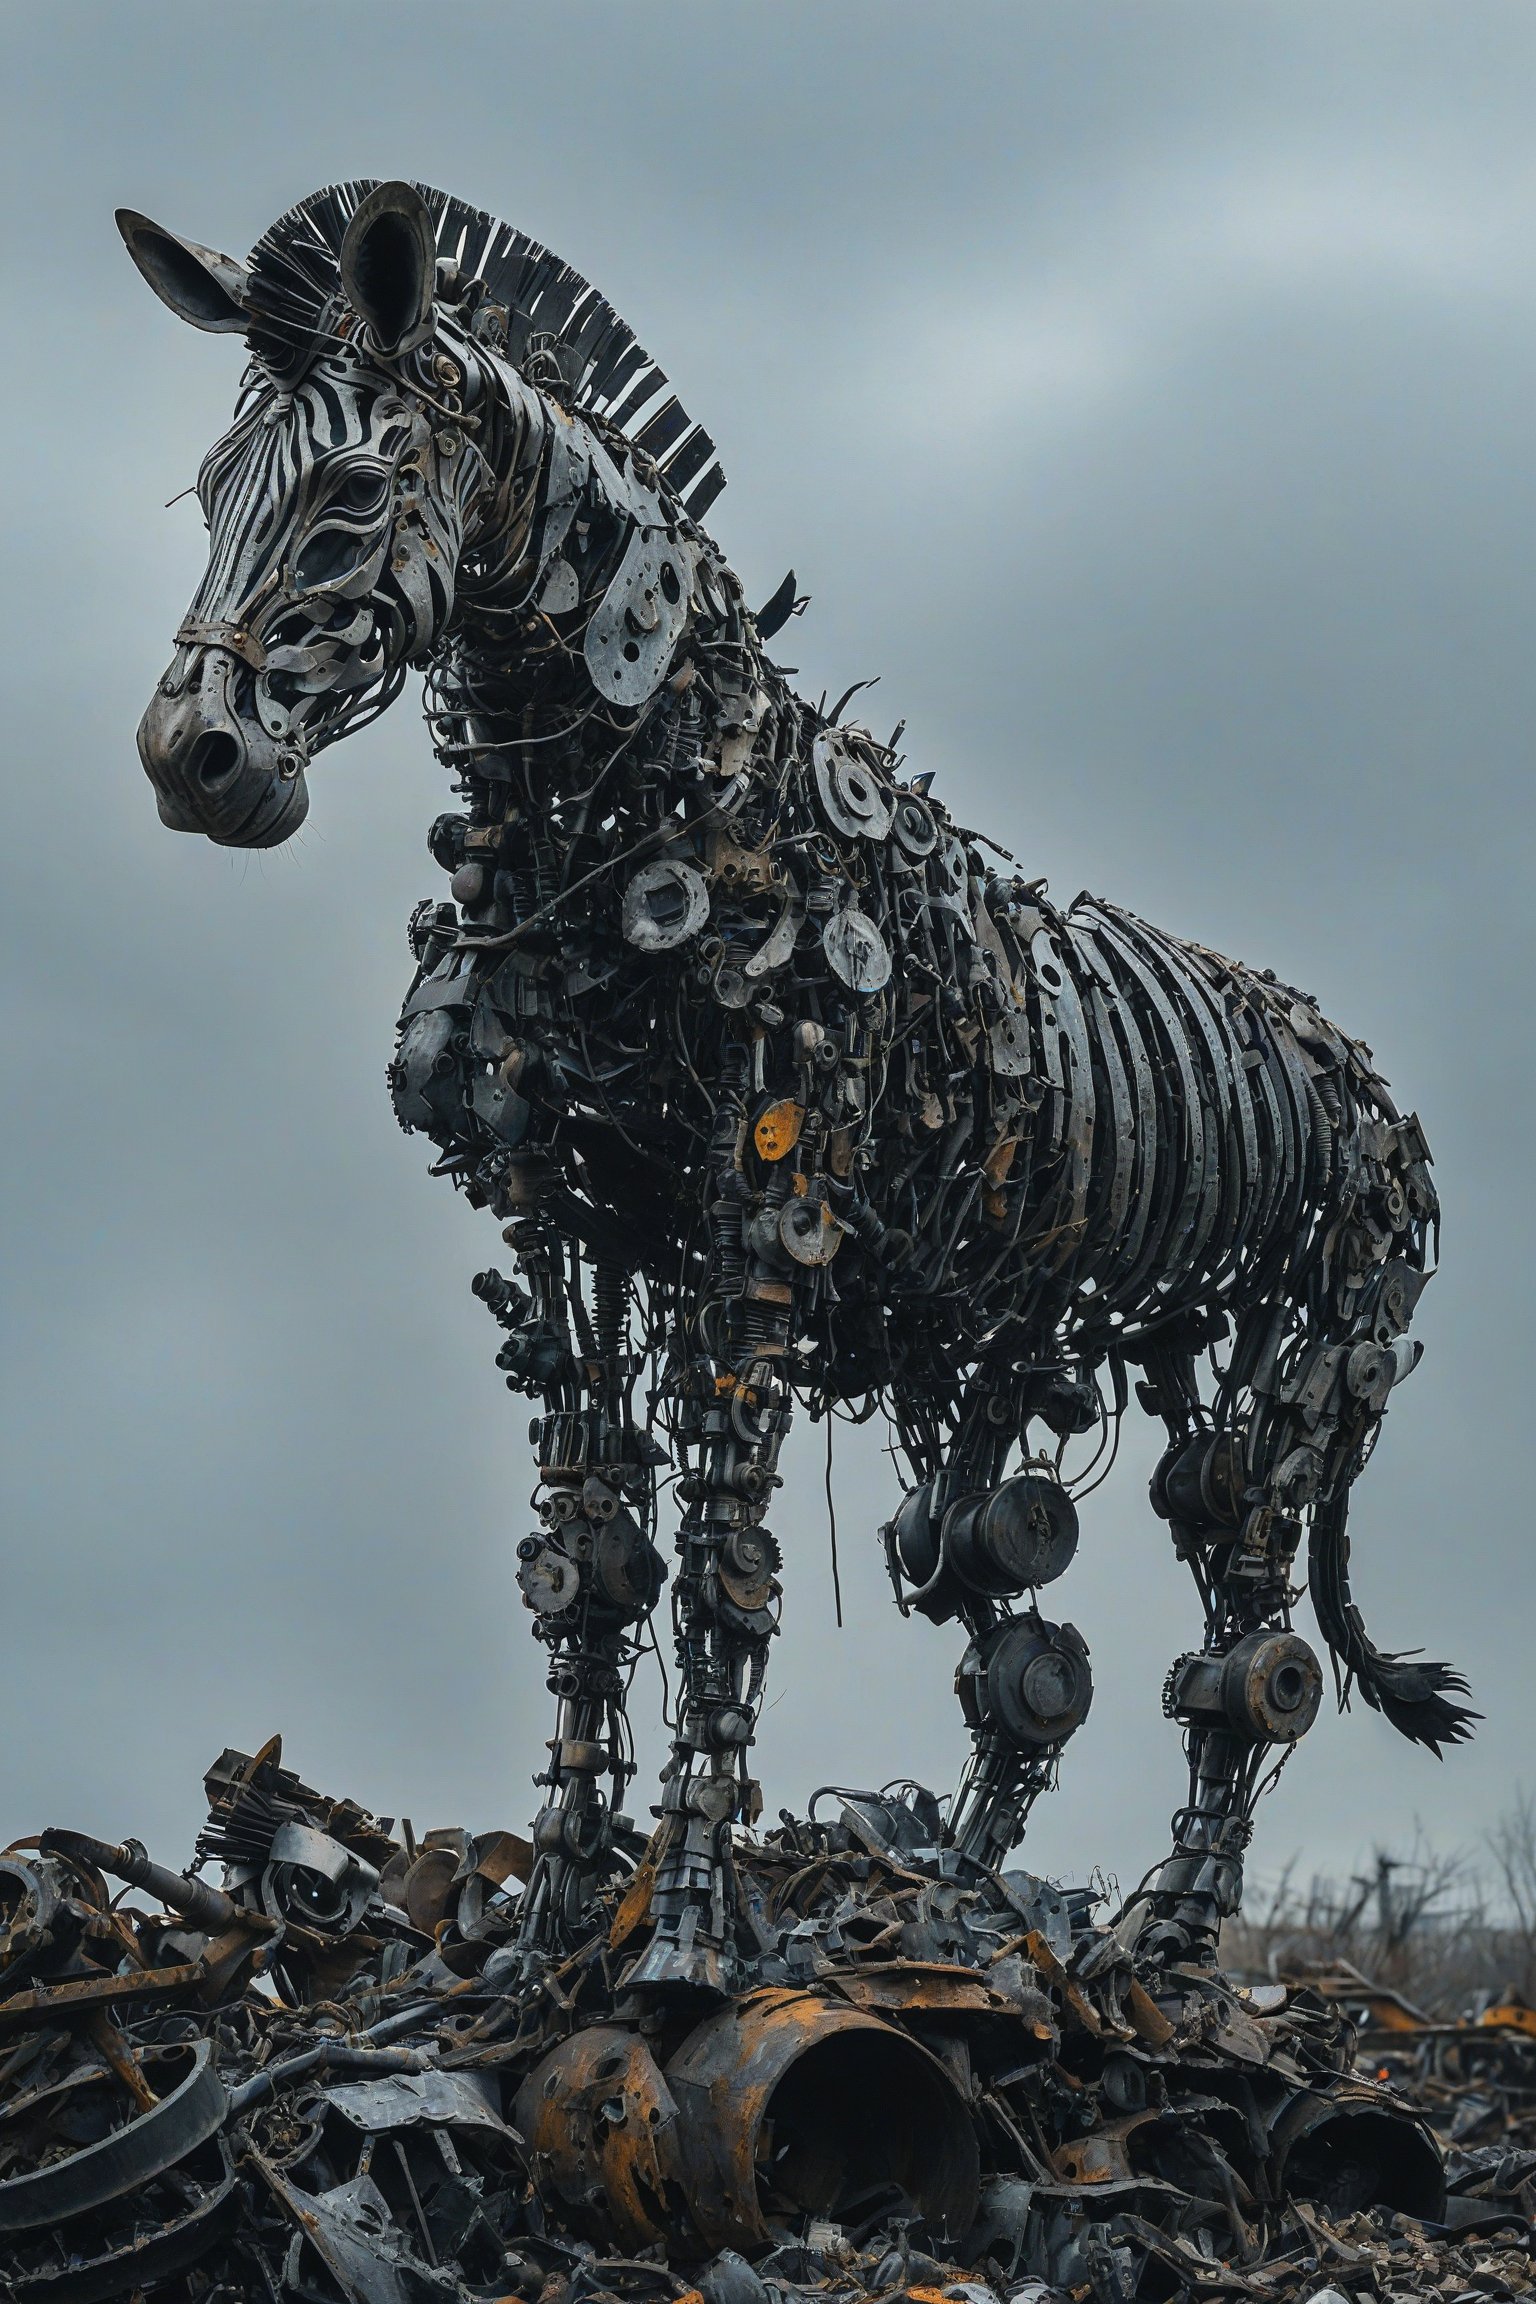 A towering, intricately constructed mechanical zebra standing atop a mound of discarded metal and debris. The zebra appears to be made of various metal parts, wires, and tools, giving it a skeletal and mechanical appearance. The background is overcast, adding a somber and post-apocalyptic feel to the scene.